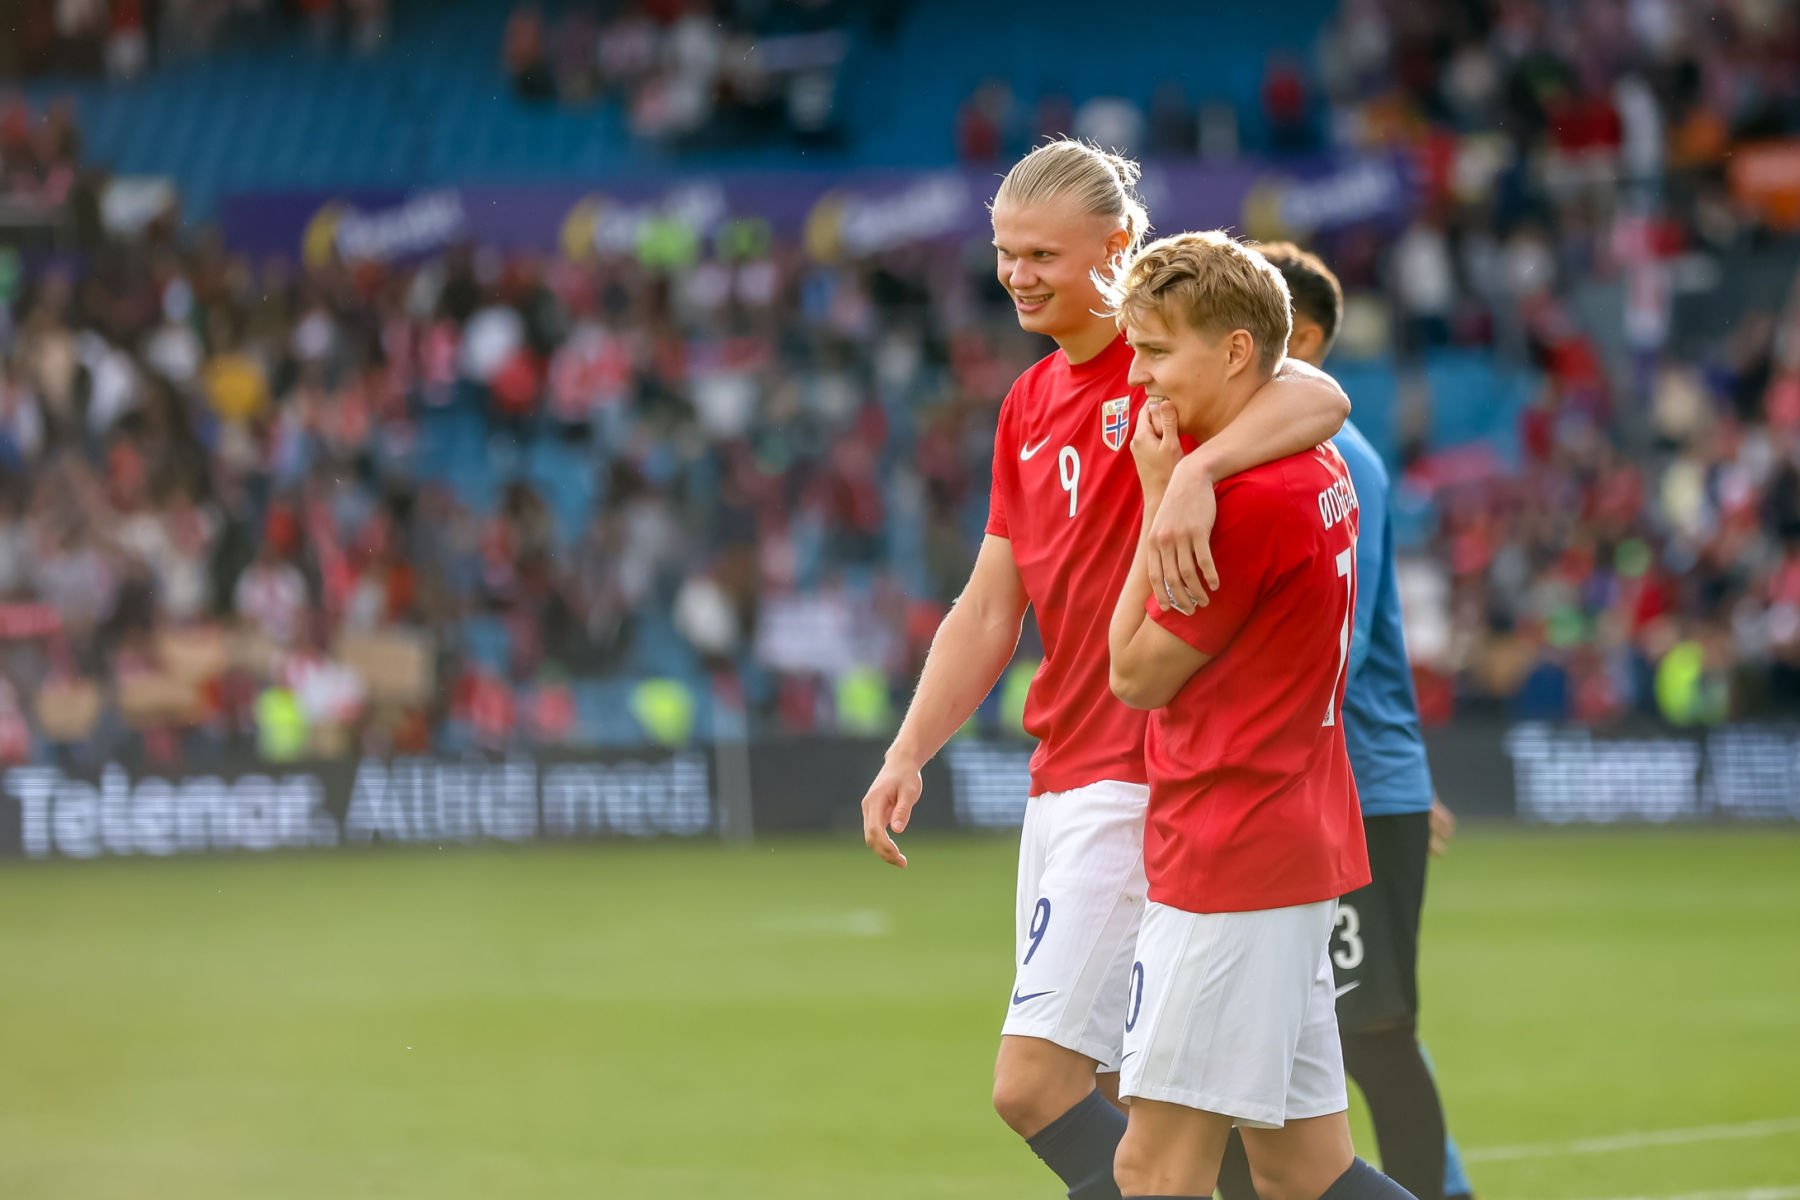 Erling Haaland and Martin Ødegaard playing for the Norway national team. Photo: Editorial credit: froarn / Shutterstock.com.